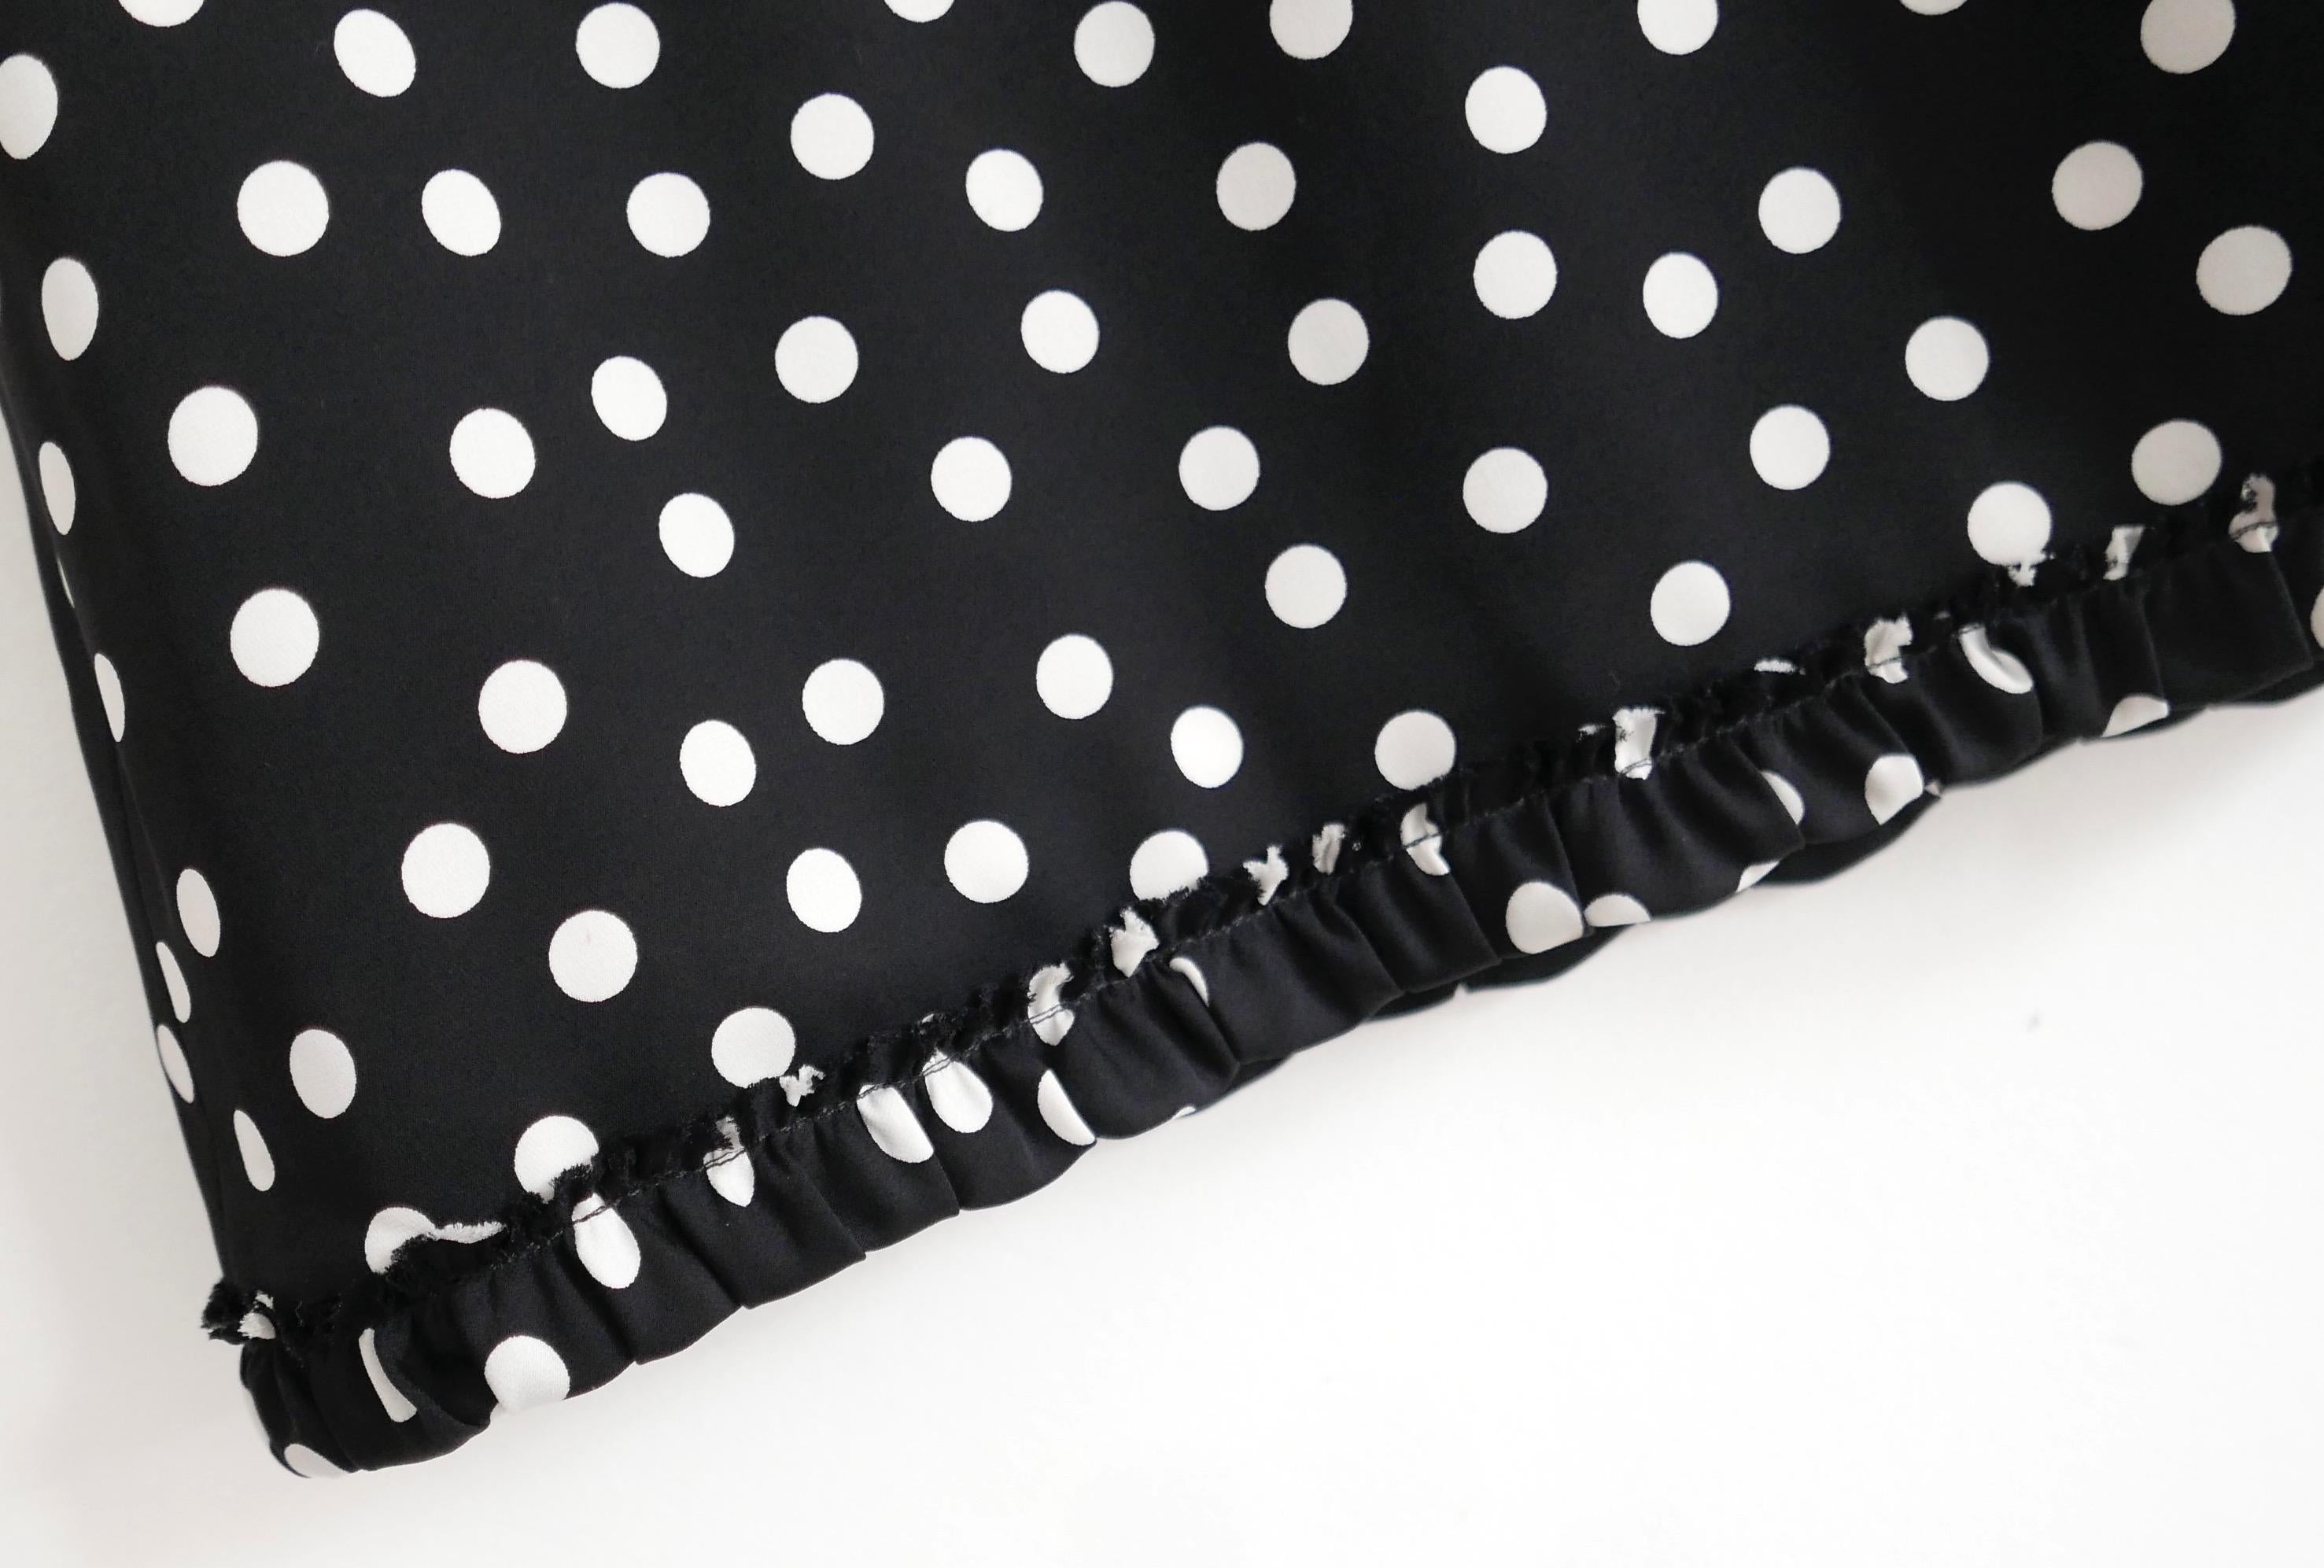 Gorgeous Dolce & Gabbana polka dot silk skirt. Bought for £1500 and worn once. Made from super soft black and white polka dot printed silk/elastane, it has frilled hem, wide elasticated waistband and silk/elastane fully stitched lining. Size